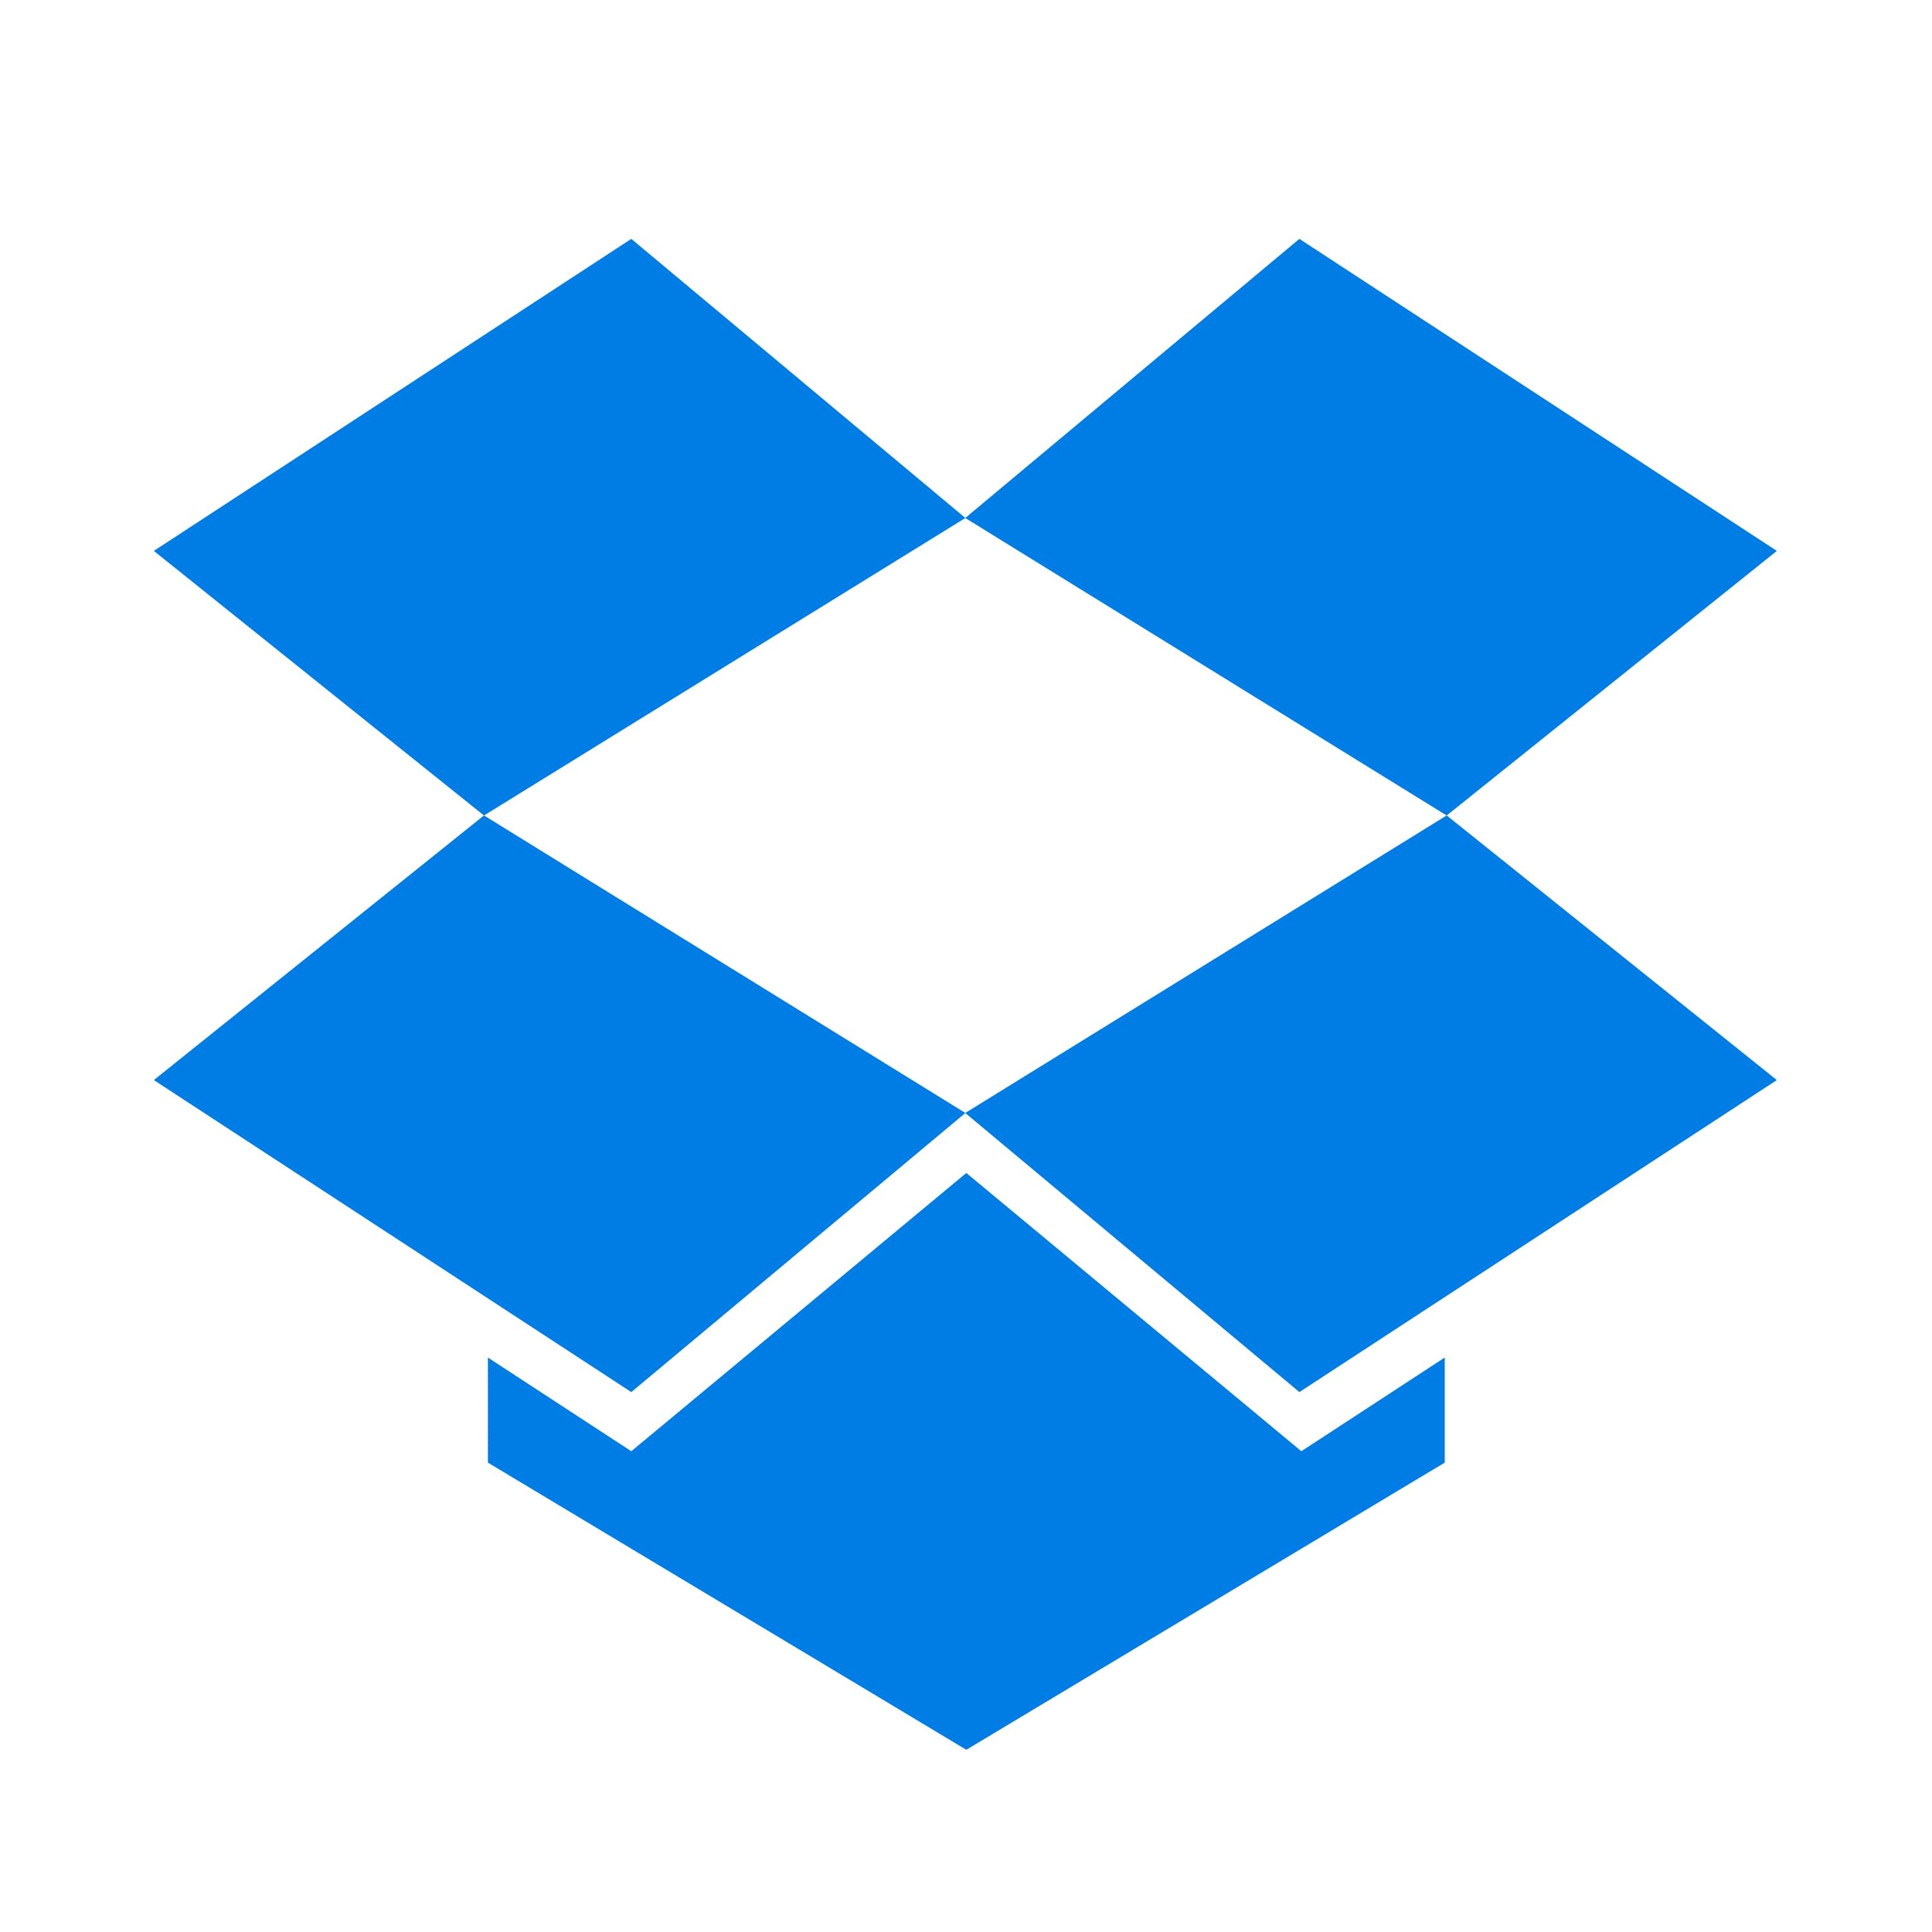 Build Your Own Dropbox Client with the Dropbox API